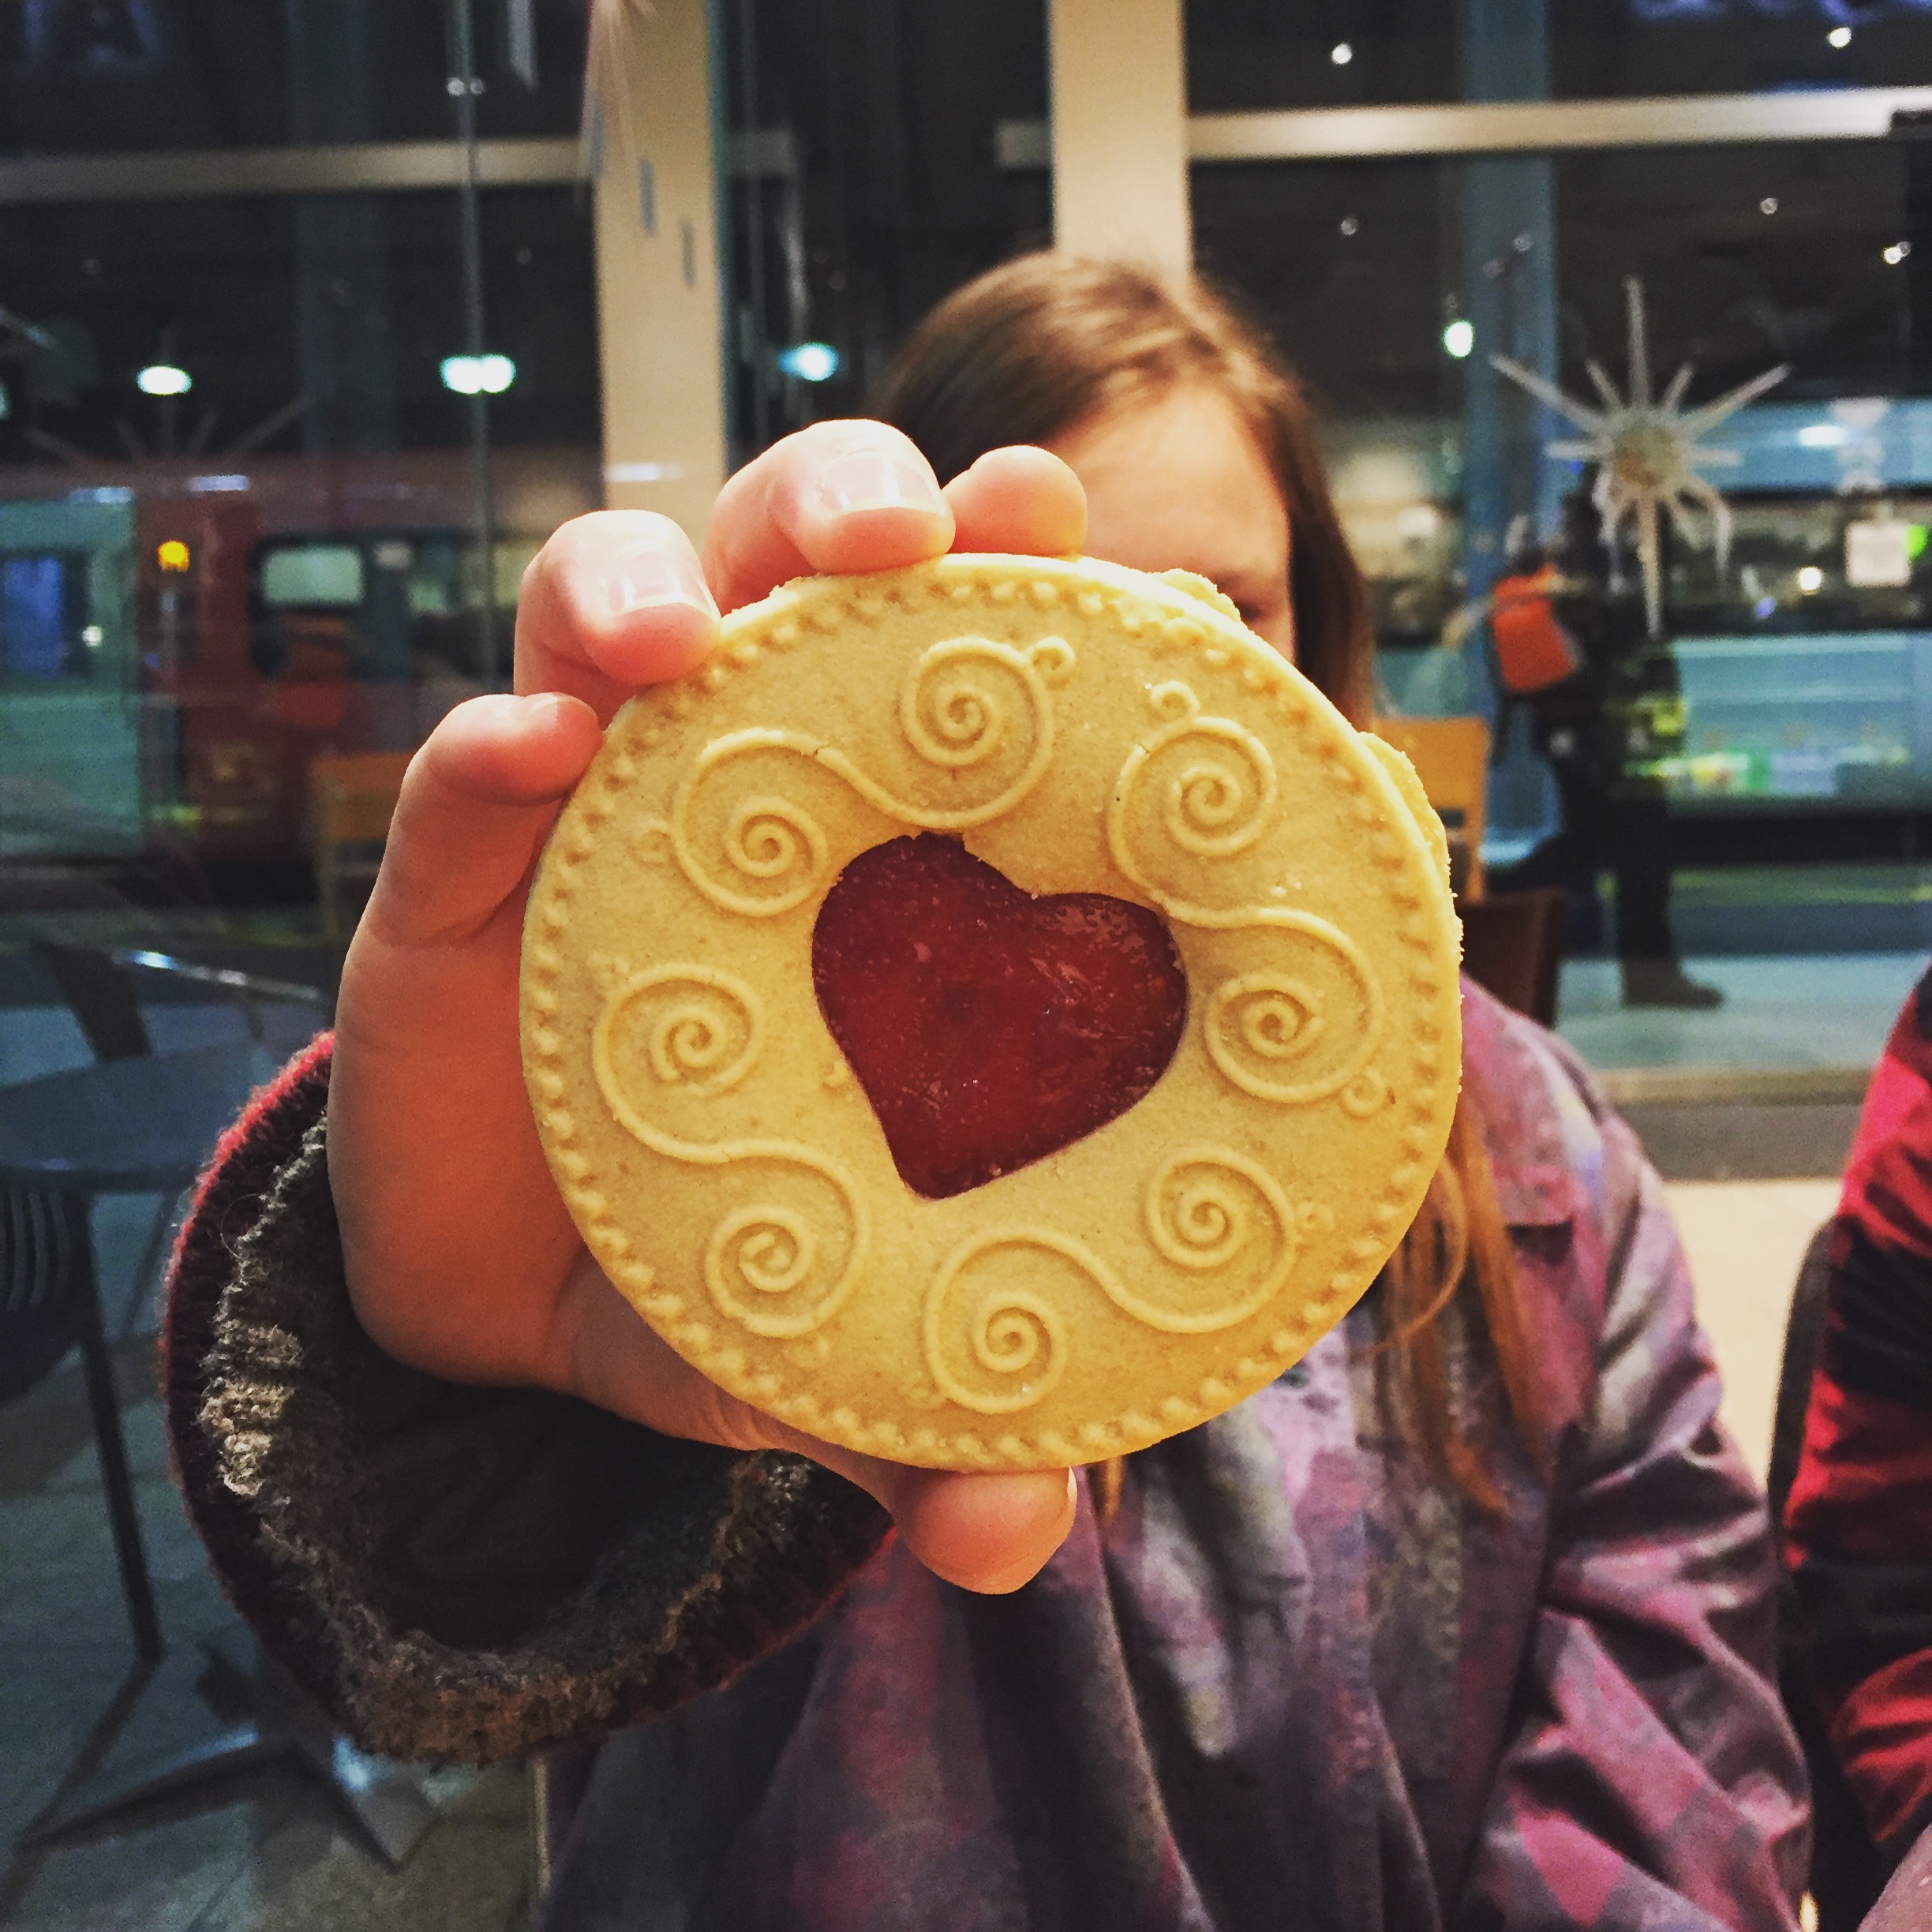 Somehow this massive Jammie Dodger sums up our R&D so far